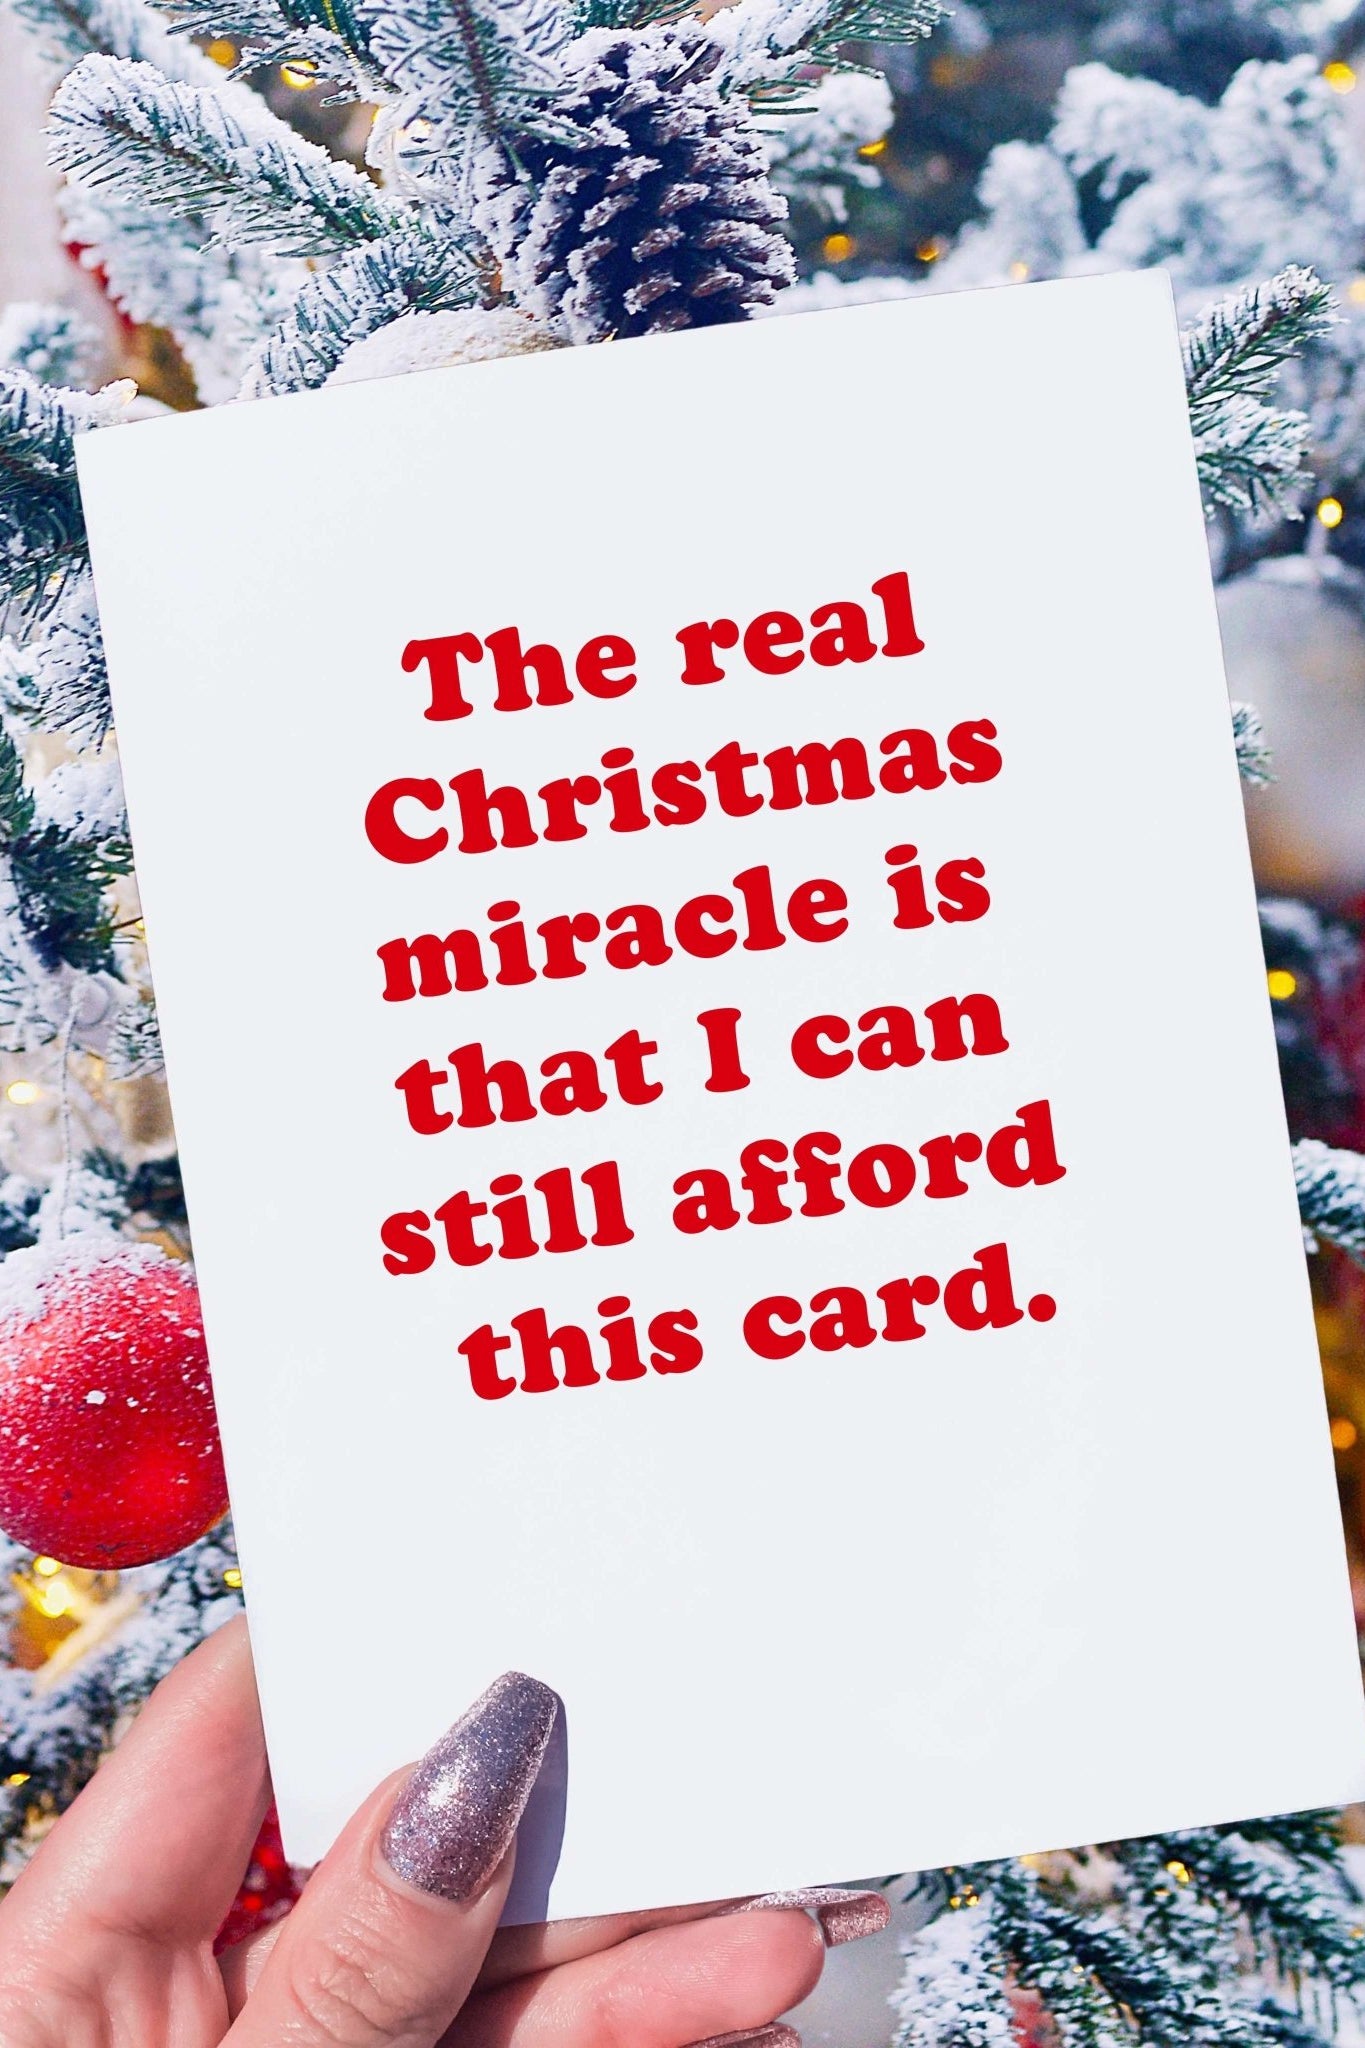 The Real Christmas Miracle Is That I Can Still Afford This Card Greeting Card - UntamedEgo LLC.